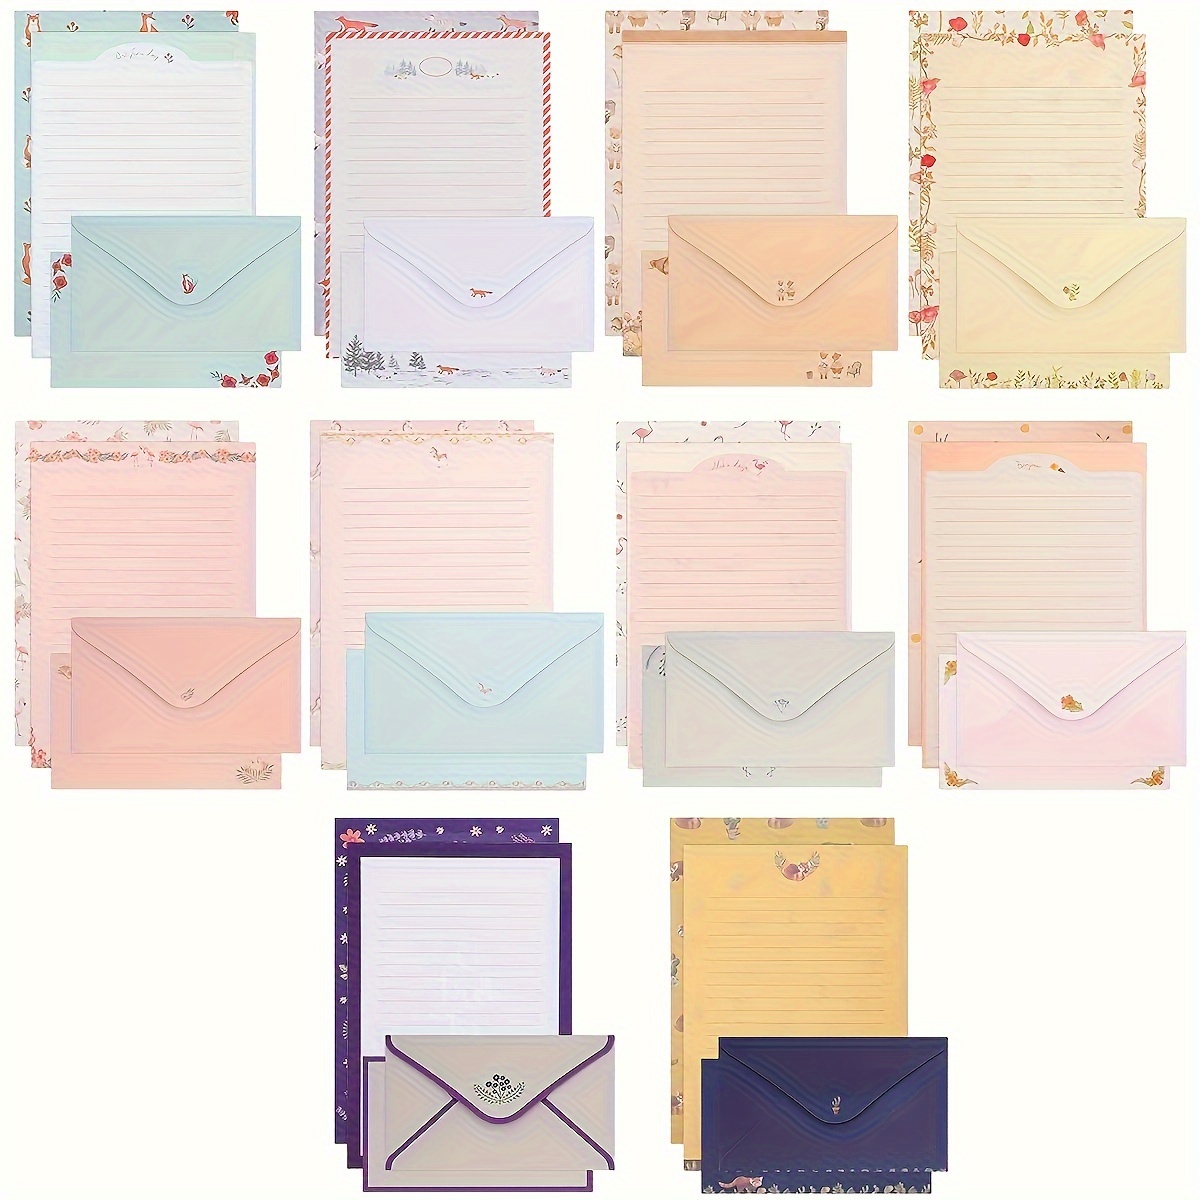 

90-piece Stationery Paper And Envelope Set (60 Sheets + 30 Envelopes) - Assorted Cute Writing Stationery Letter Set With 10 Unique Styles For Personalized Letters And Notes